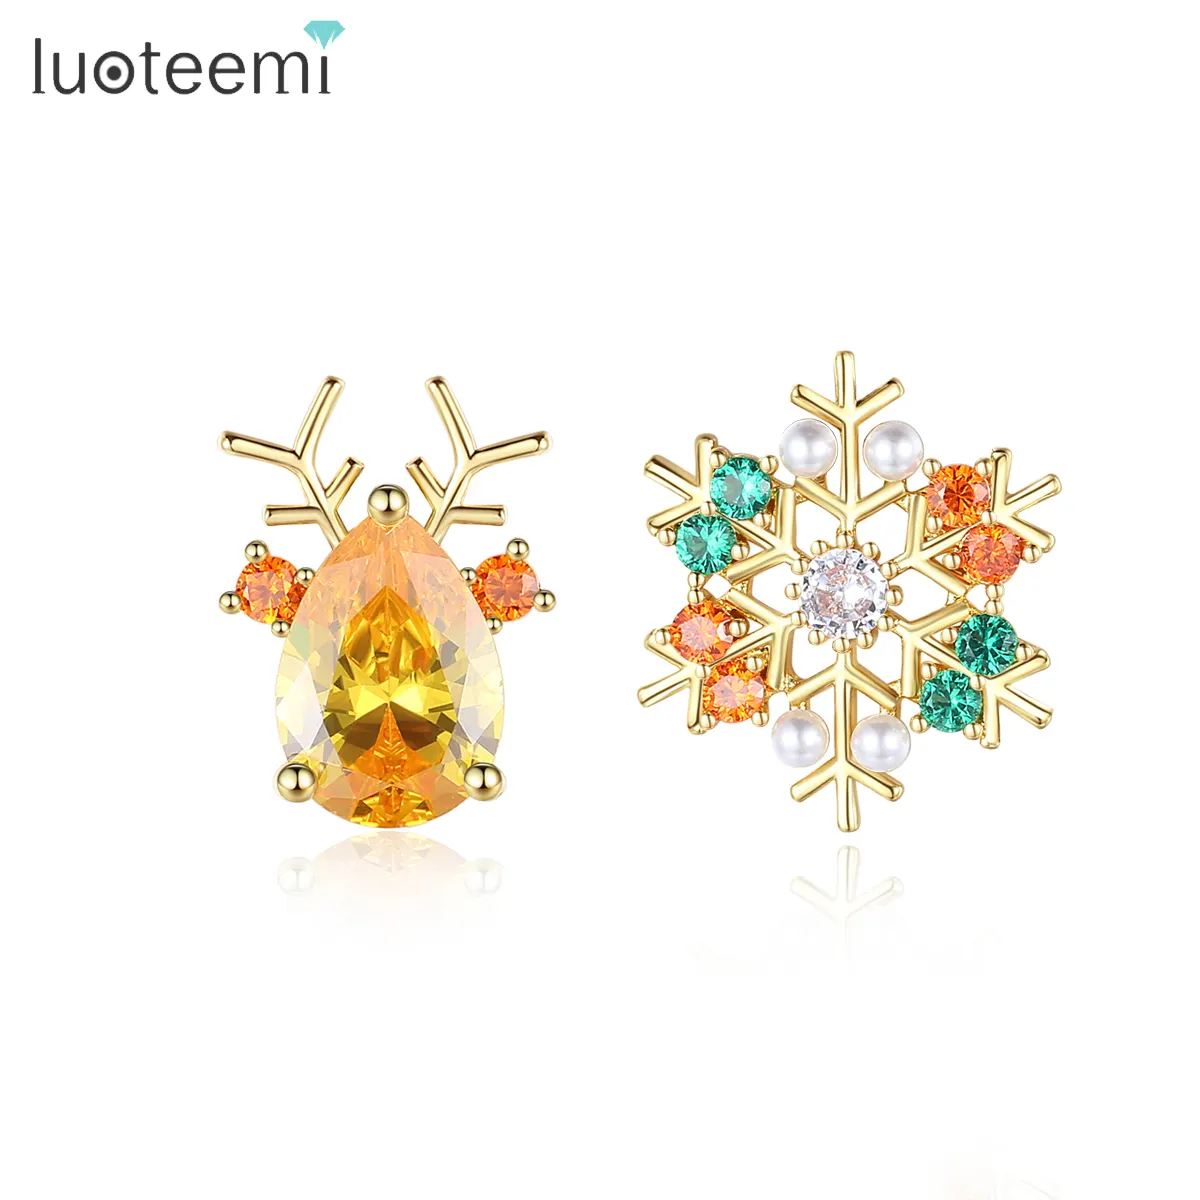 LUOTEEMI Trending Irregular Unique Popular Stud Different Pair Hot Selling Charm Cute Christmas Earrings